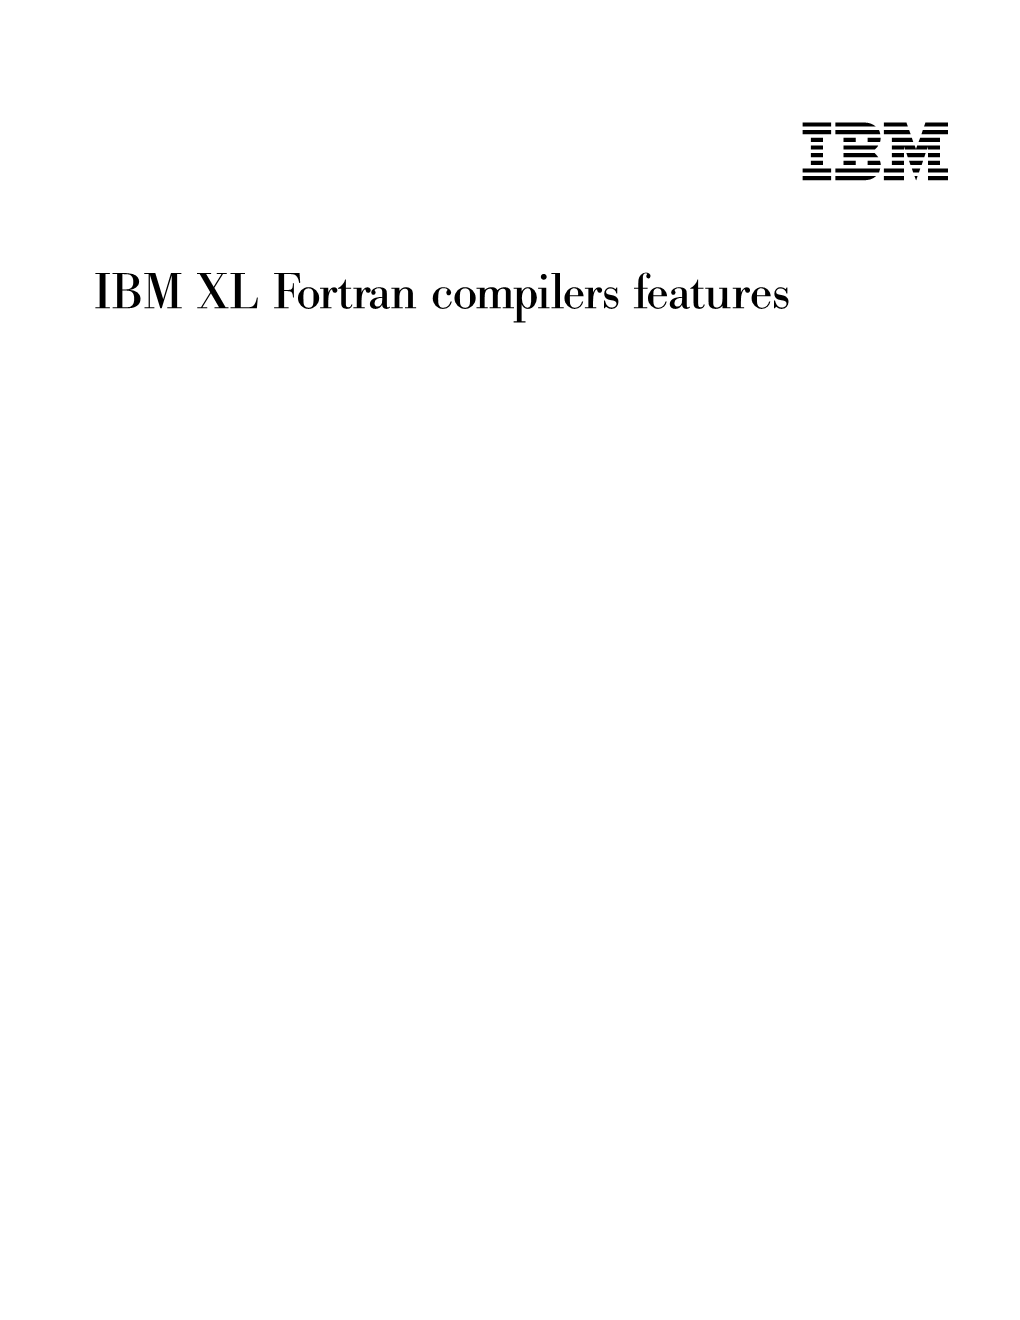 IBM XL Fortran Compilers Features